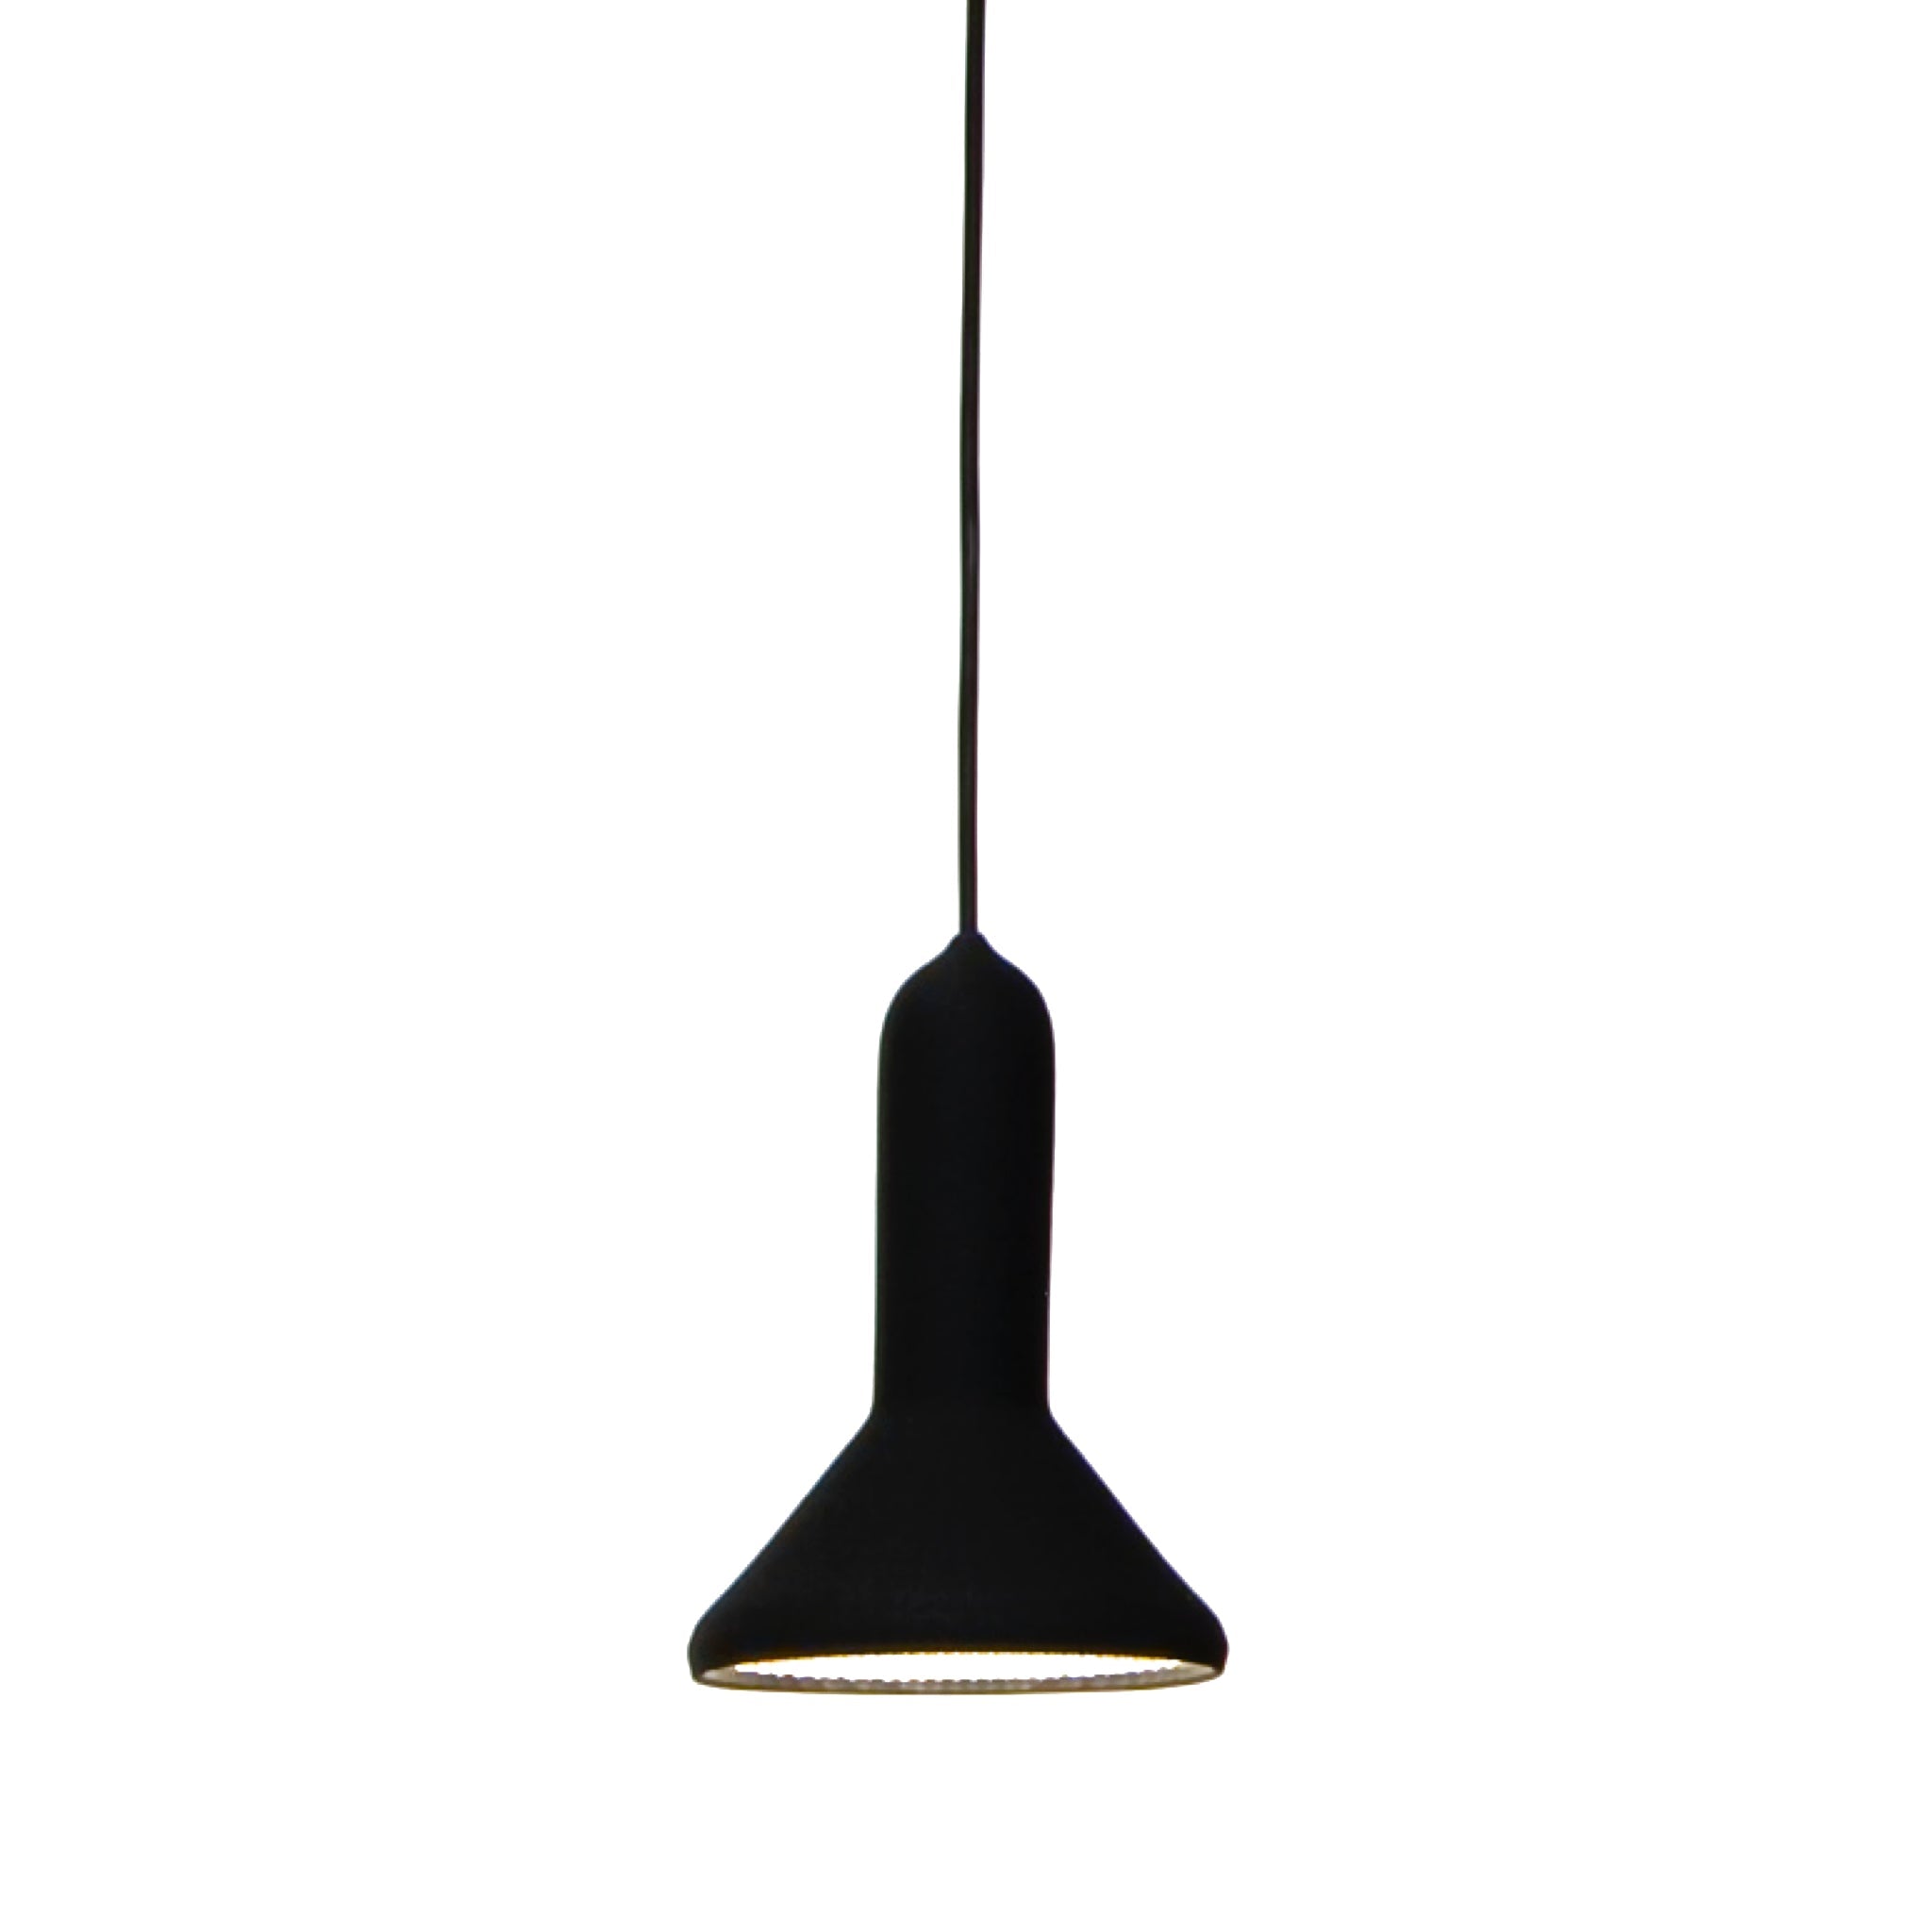 Clearance Torch Light Suspension / S1 Small Cone / Black with Black Cable by Established & Sons